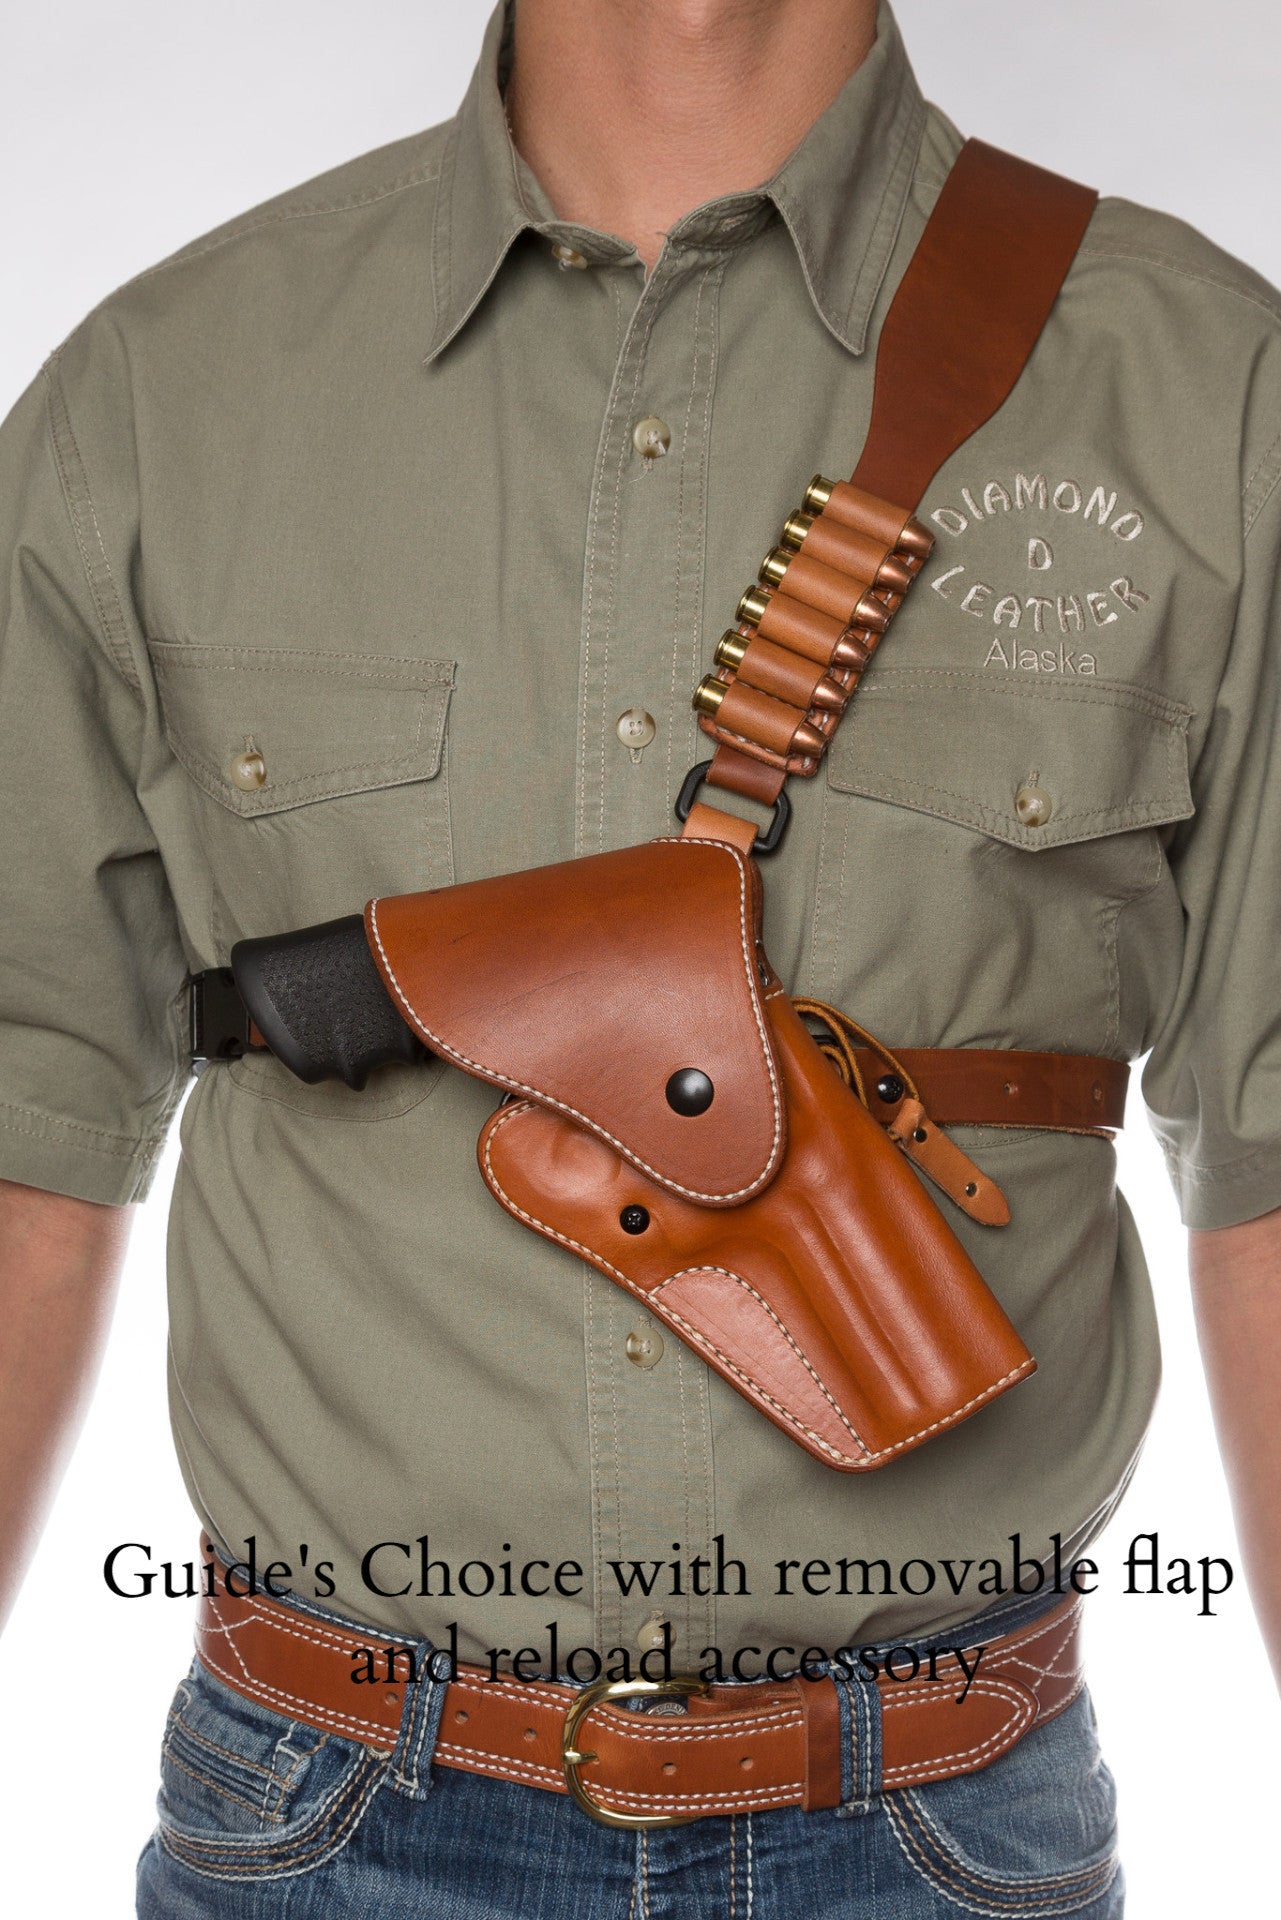 Diamond D Guides Choice™ Leather Chest Holster Taurus Raging Hunter 8 3/8  